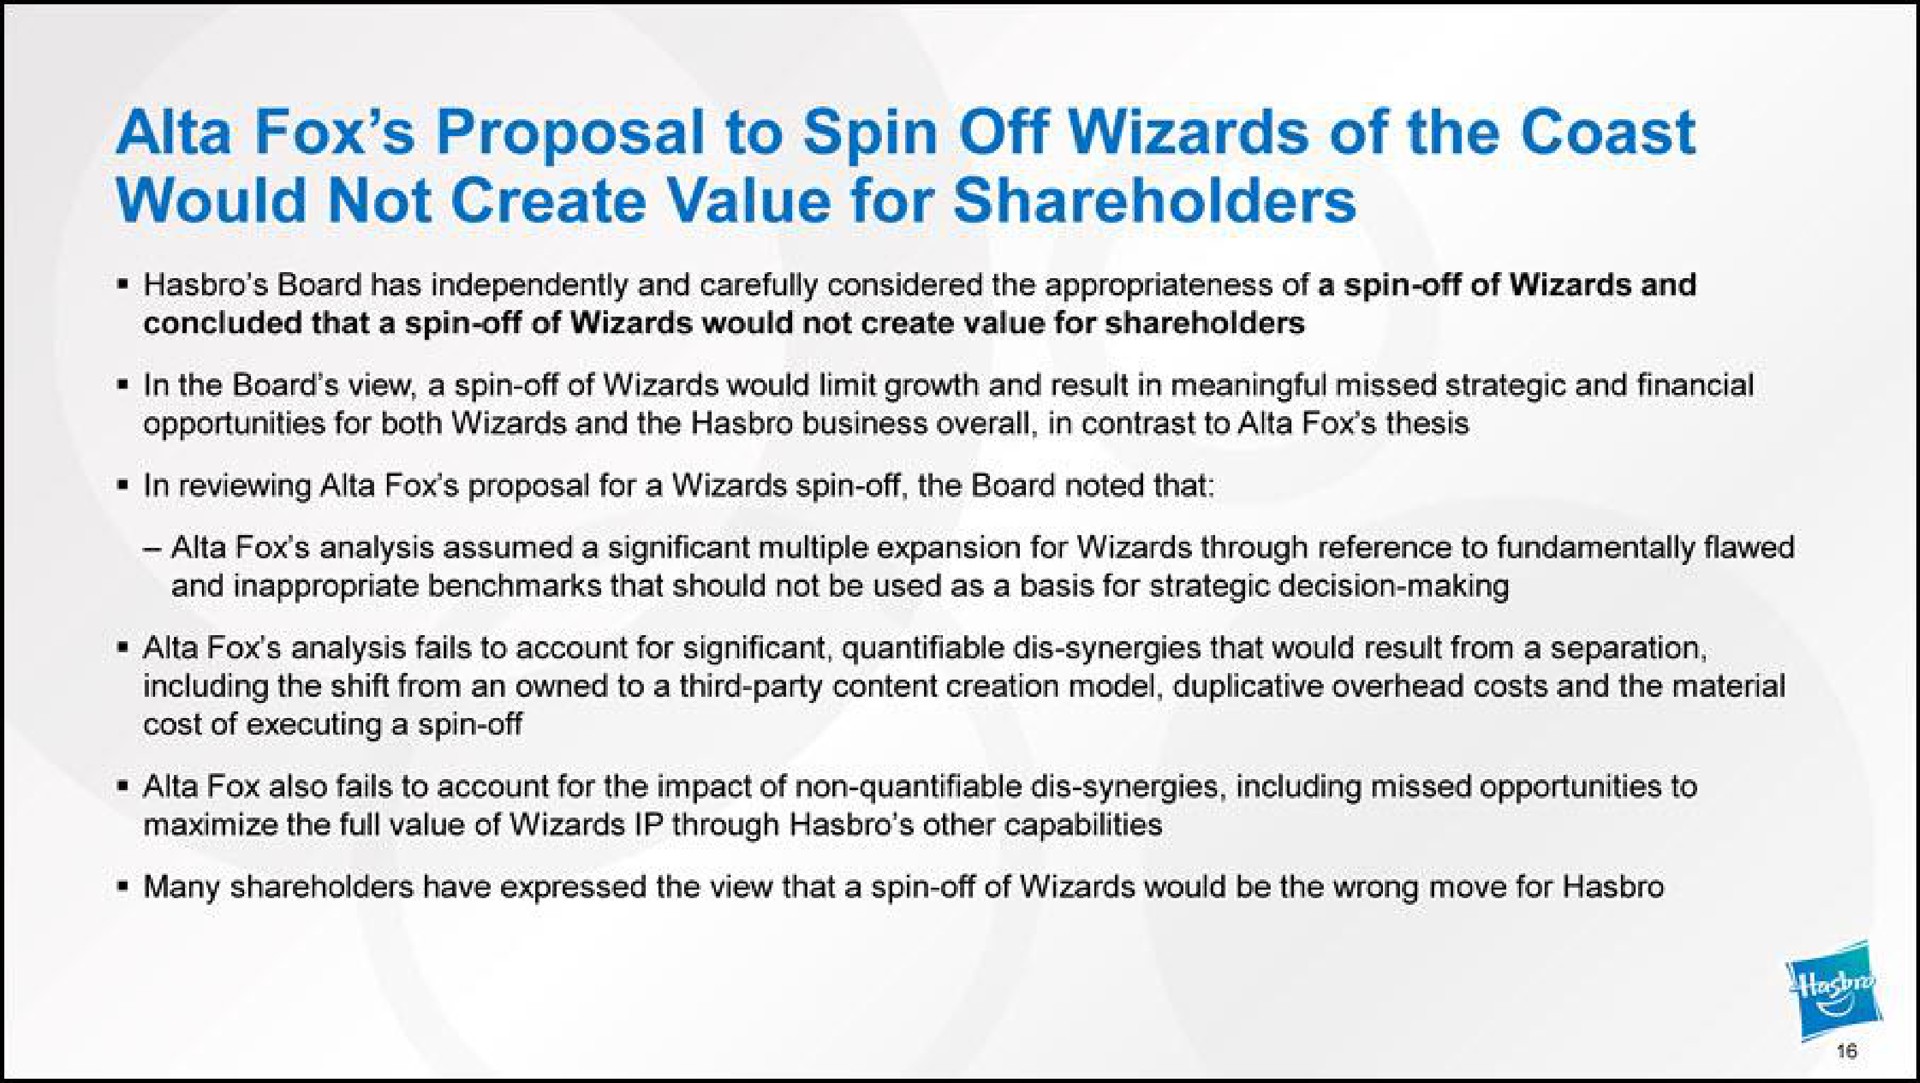 fox proposal to spin off wizards of the coast would not create value for shareholders in the board view a spin off of wizards would limit growth and result in meaningful missed strategic and financial opportunities for both wizards and the business overall in contrast to fox thesis in reviewing fox proposal for a wizards spin off the board noted that fox also fails to account for the impact of non quantifiable dis synergies including missed opportunities to maximize the full value of wizards through other capabilities | Hasbro